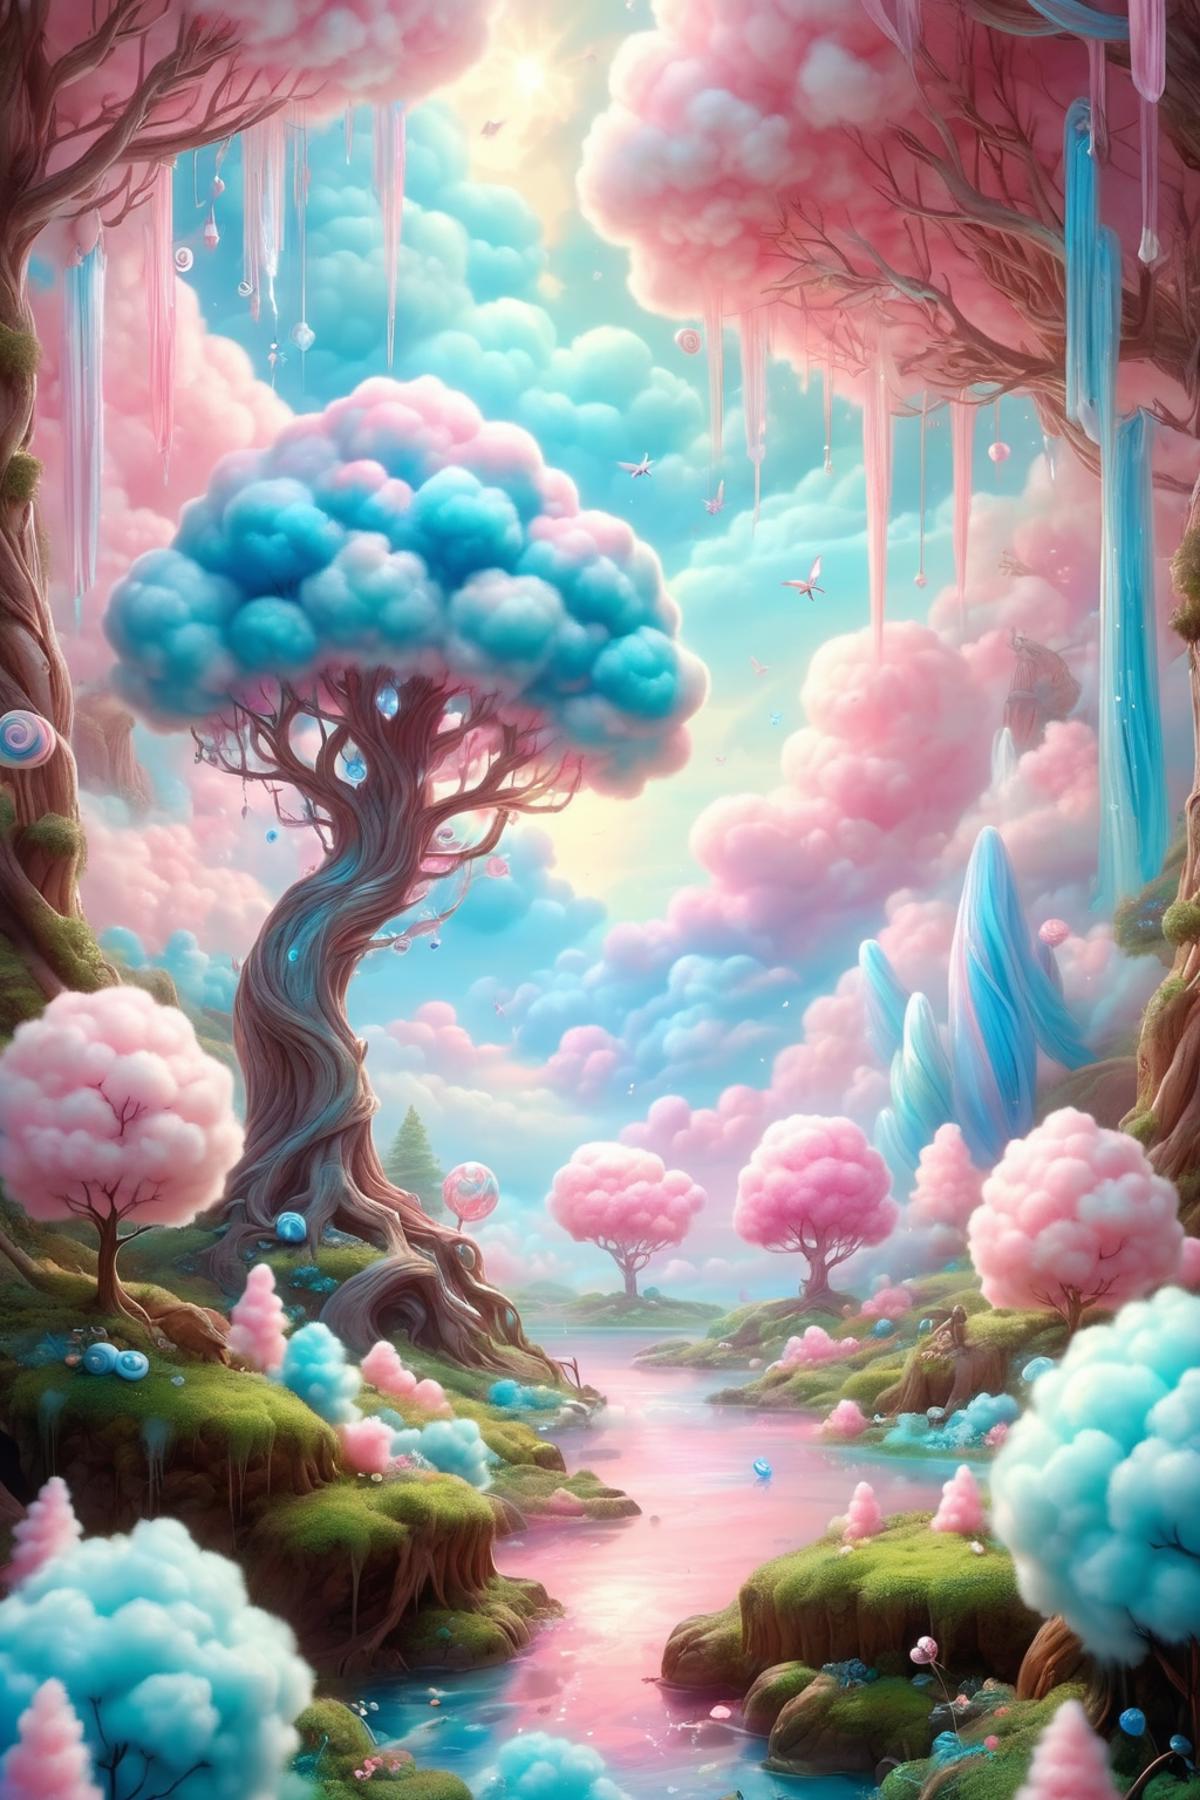 A Dreamy Landscape of Clouds, Trees, and Pink and Blue Flowers